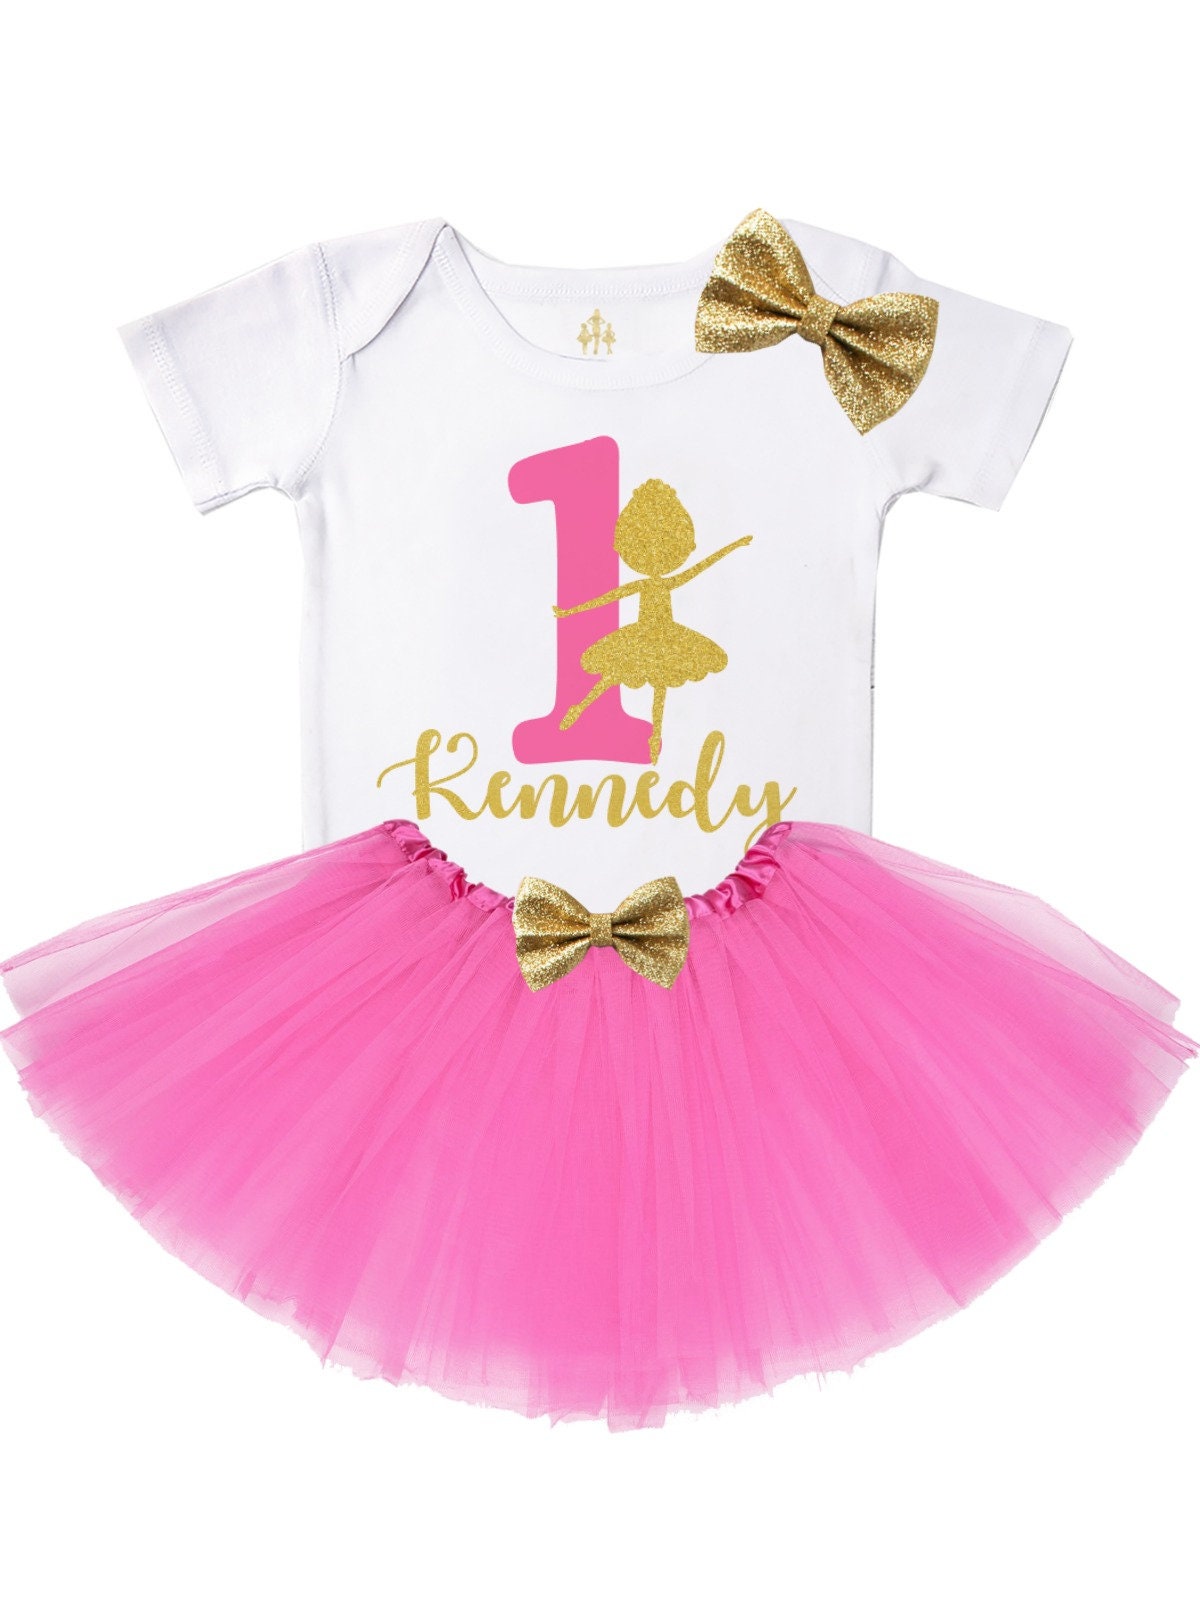 Ballerina birthday outfit first birthday outfit pink and gold | Etsy